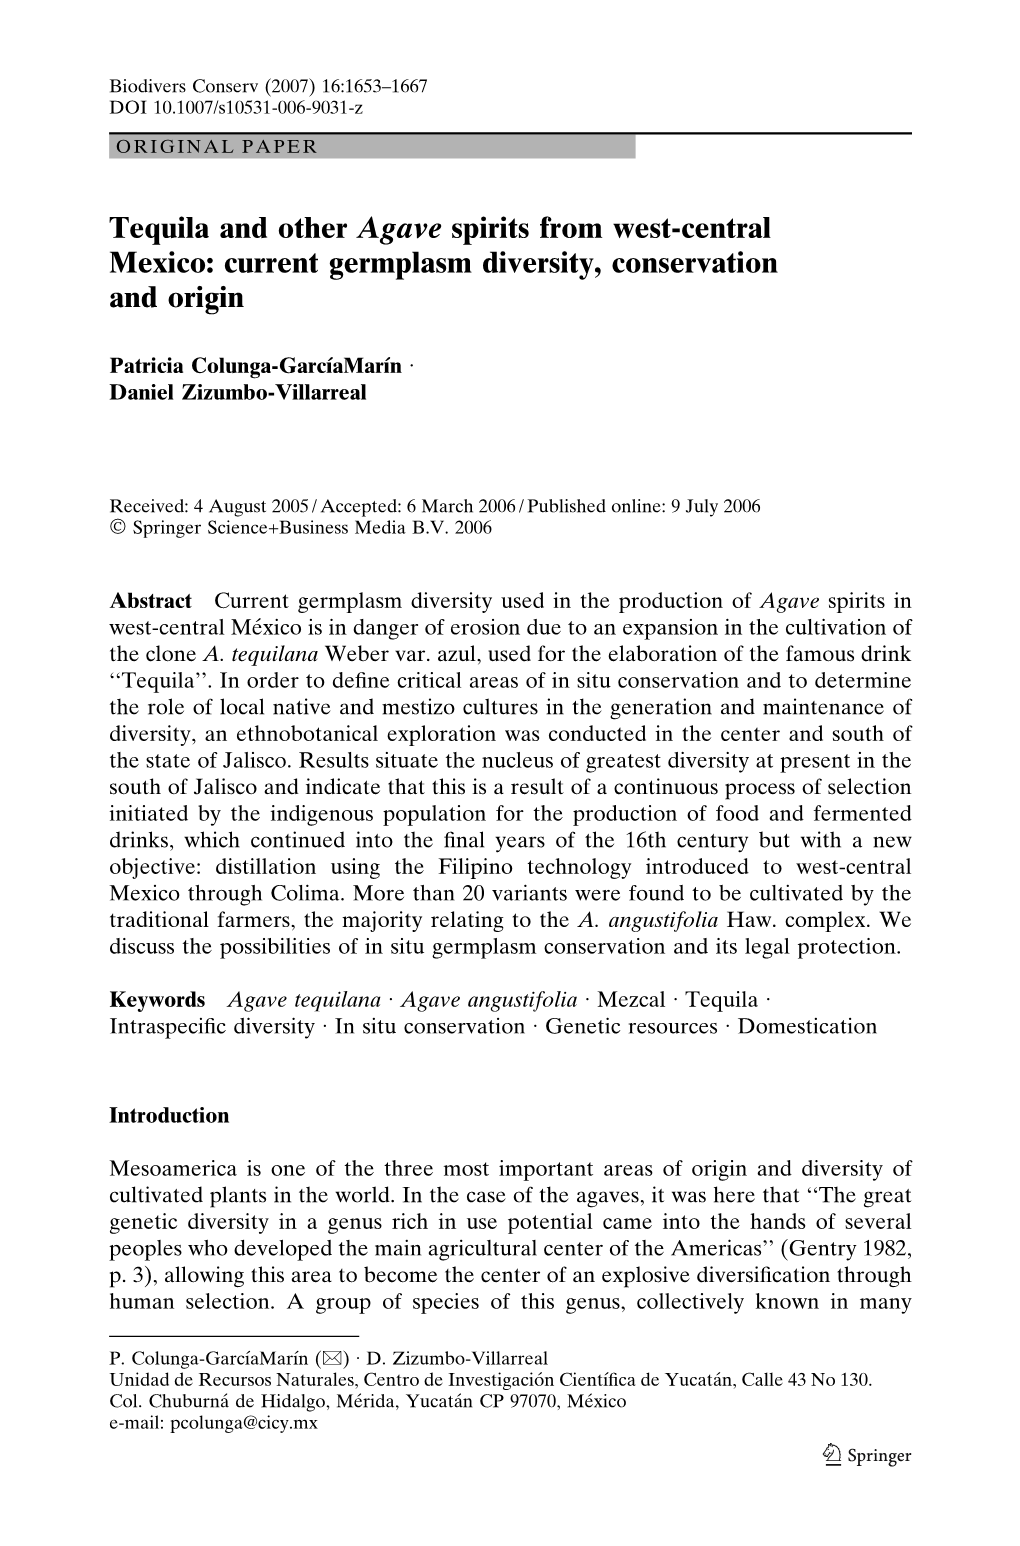 Tequila and Other Agave Spirits from West-Central Mexico: Current Germplasm Diversity, Conservation and Origin